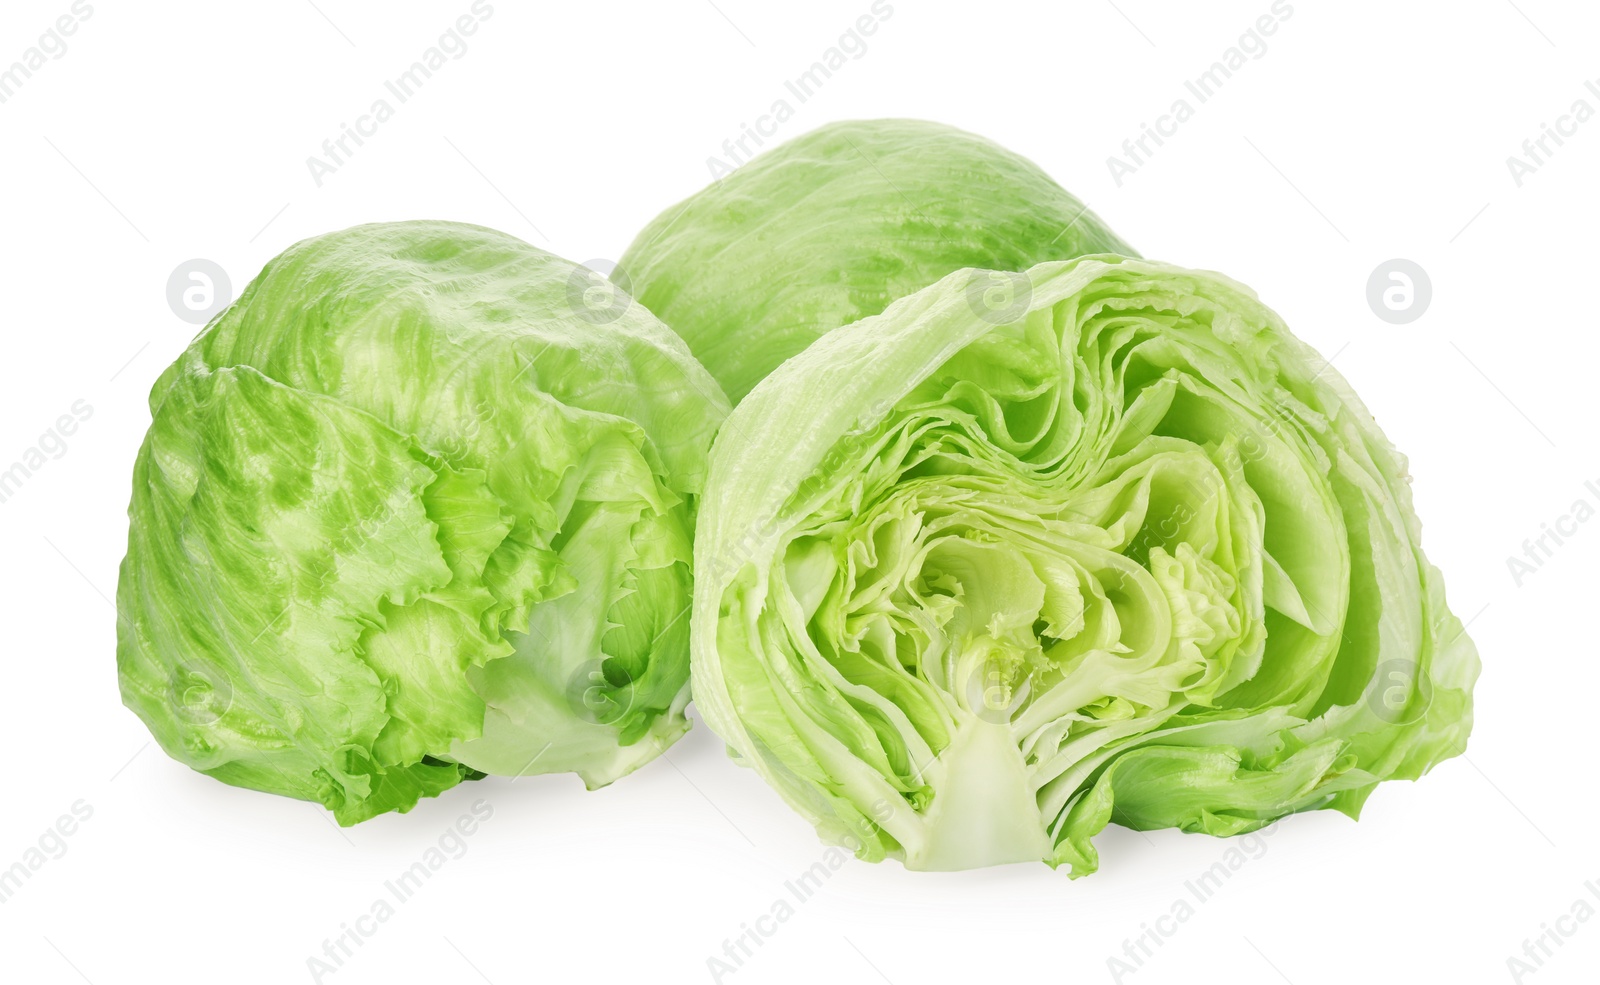 Photo of Whole and cut fresh green iceberg lettuces isolated on white